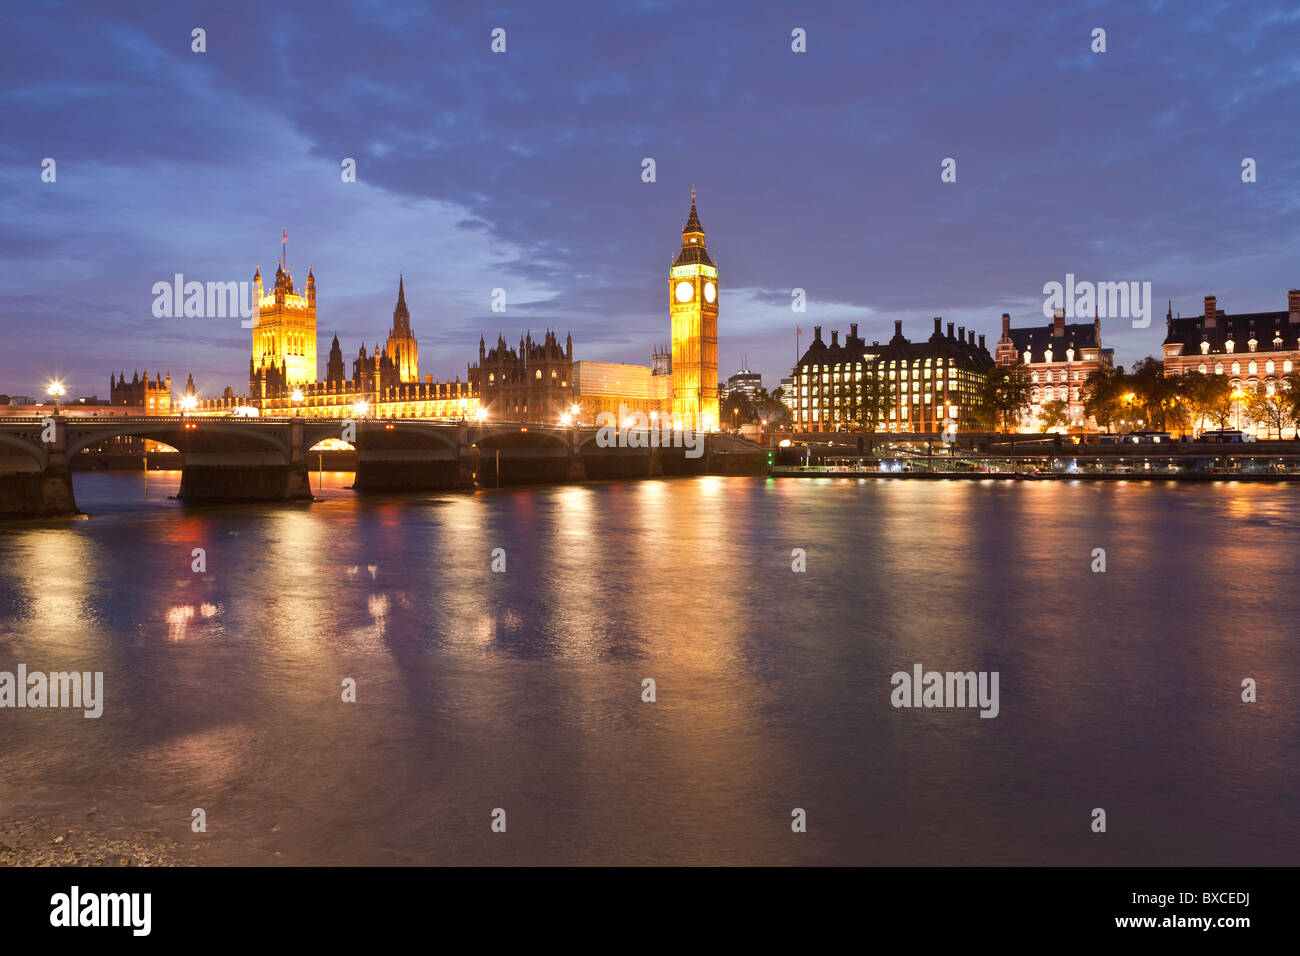 THAMES RIVER, ST. WESTMINSTER BRIDGE,WESTMINSTER HALL, HOUSES OF PARLIAMENT, BIG BEN, LONDON, ENGLAND, GREAT BRITAIN Stock Photo